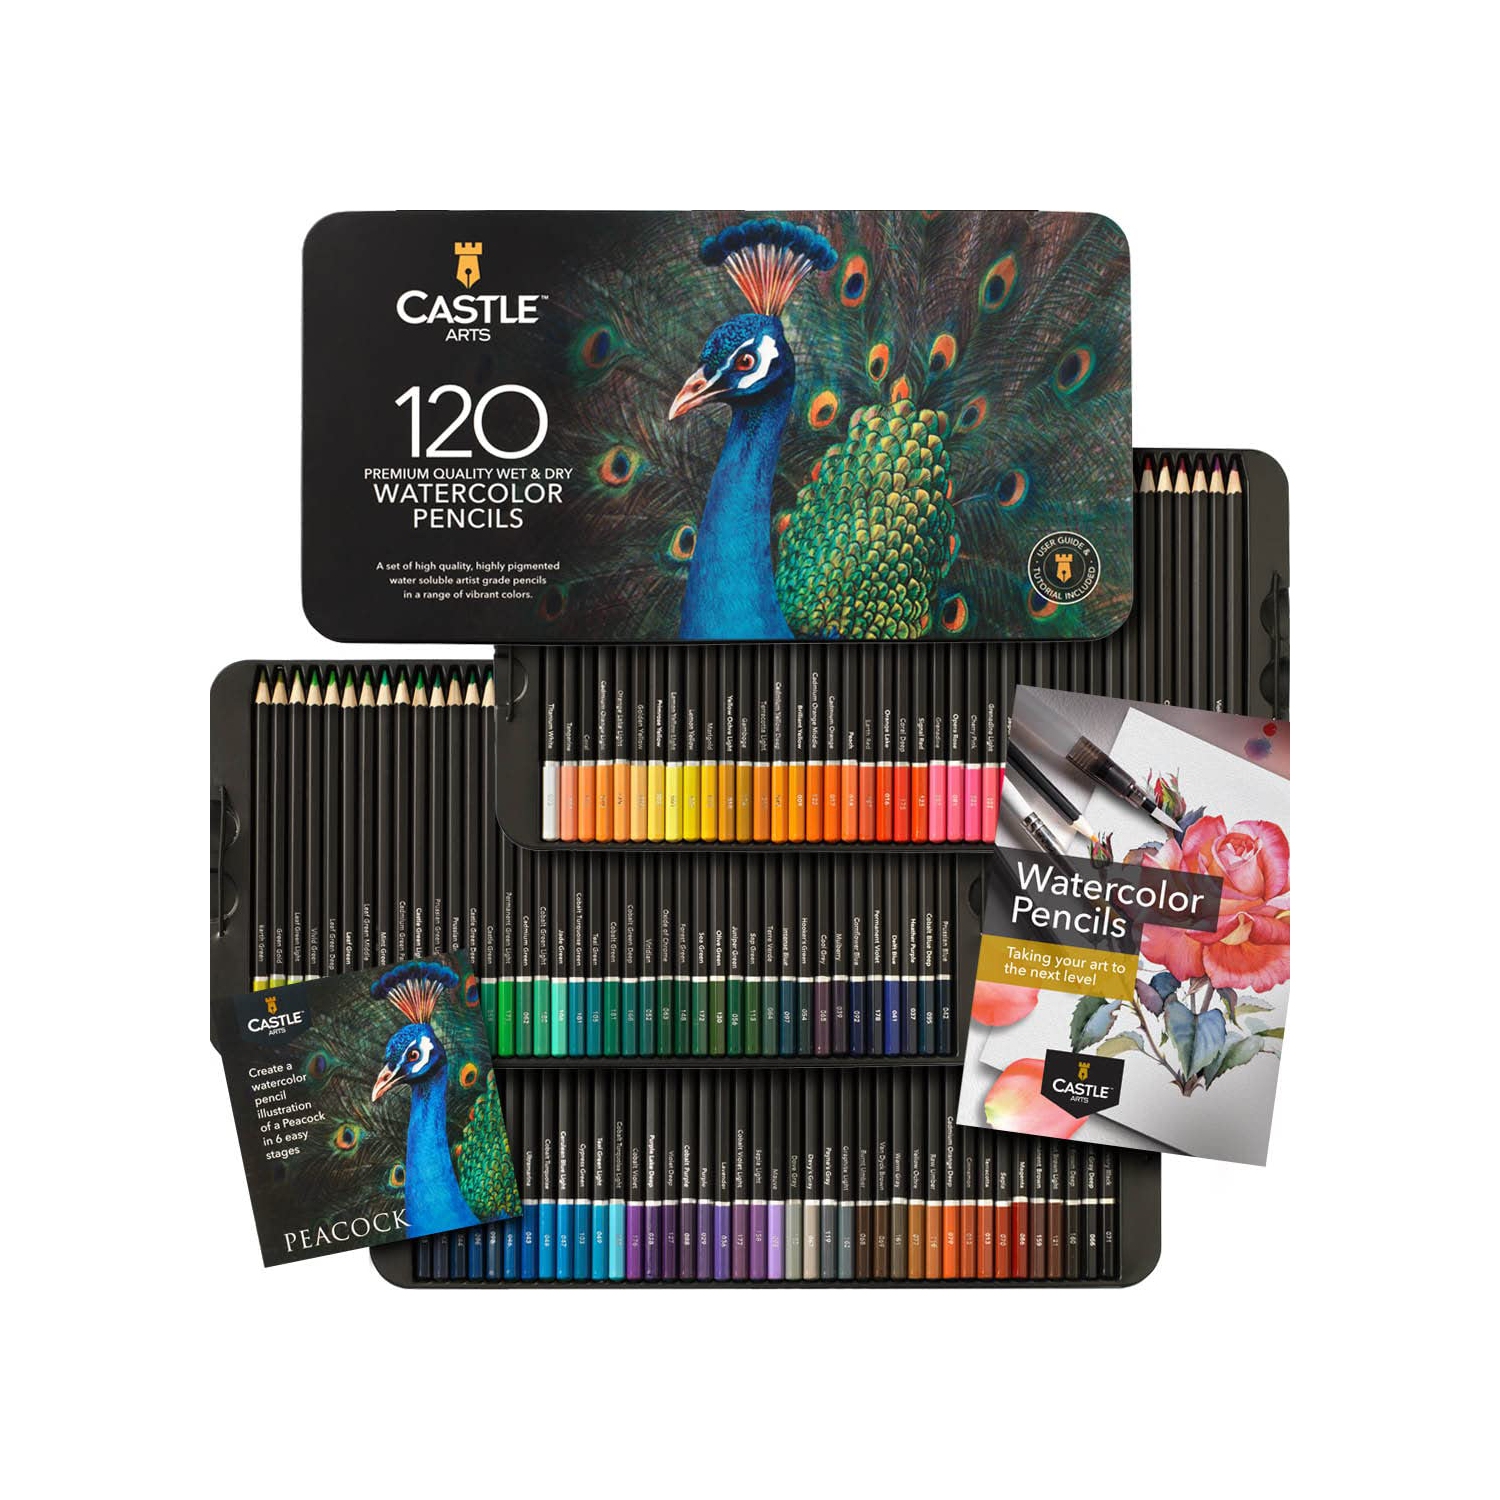 VibrantArt 120 Watercolor Pencils Set - Premium Quality Pigments for Adult Artists and Professionals - Draw, Paint, and Create with Ease - Protected and Organized in Presentation T